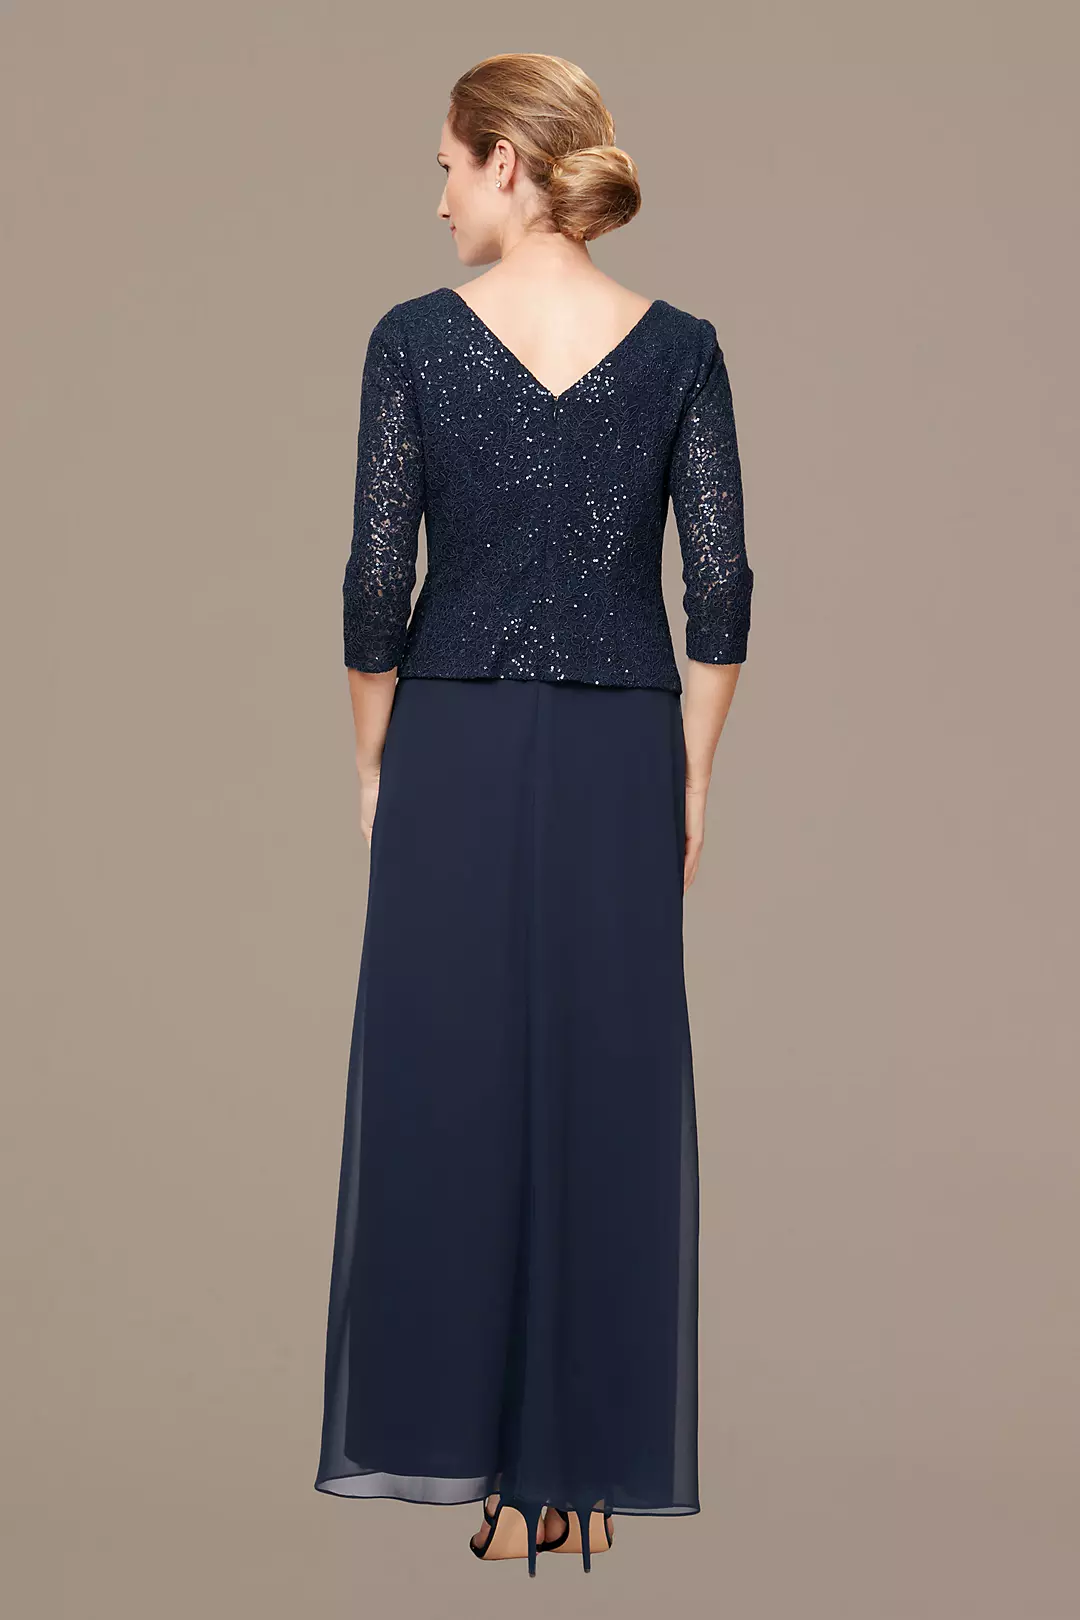 Sequin Lace 3/4 Sleeve Dress with Chiffon Skirt Image 2